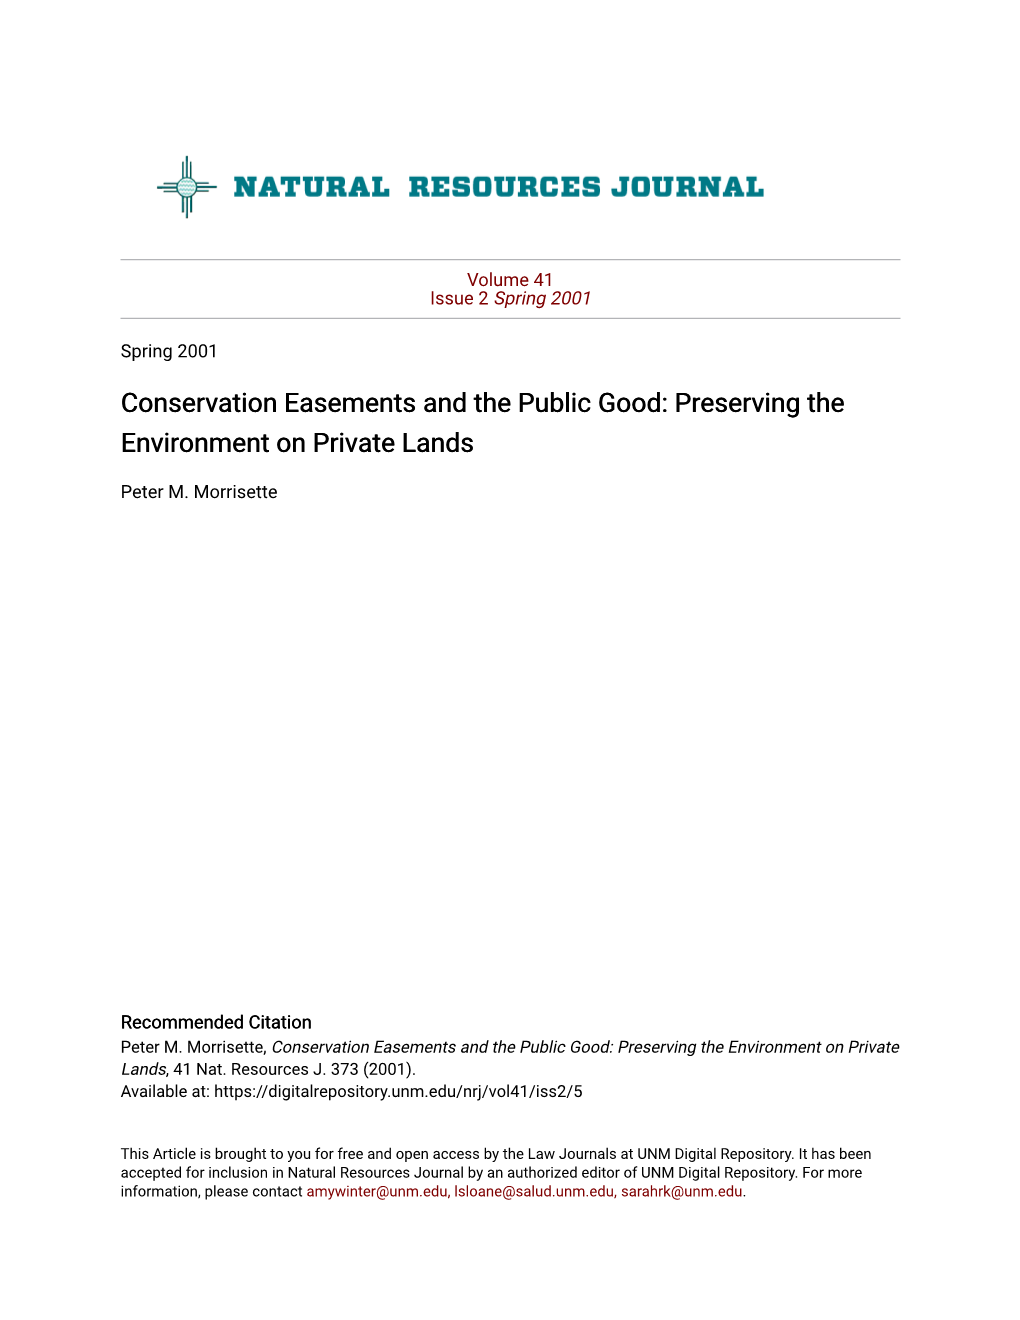 Conservation Easements and the Public Good: Preserving the Environment on Private Lands